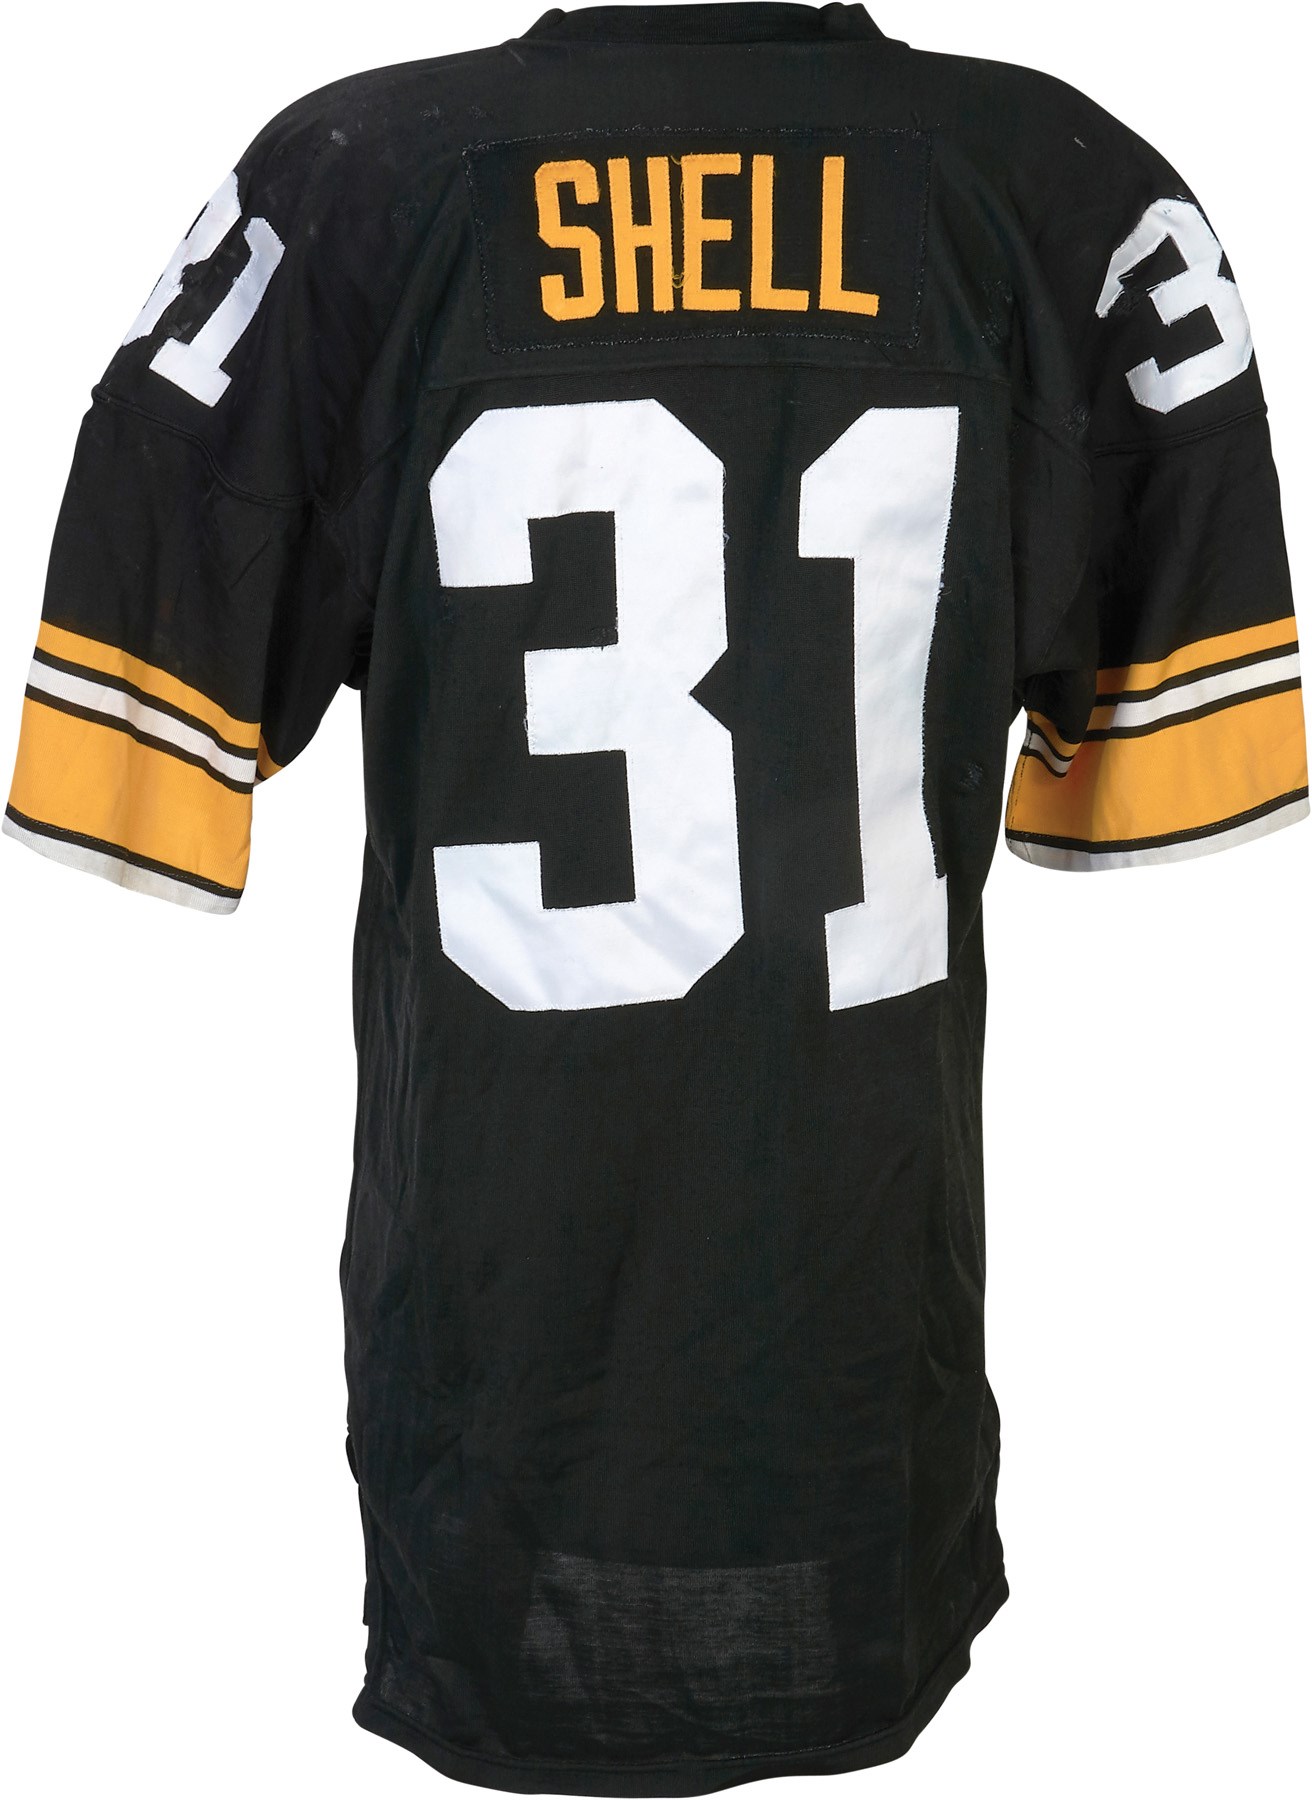 1985 Donnie Shell Pittsburgh Steelers Game Worn Jersey (Photo-Matched)